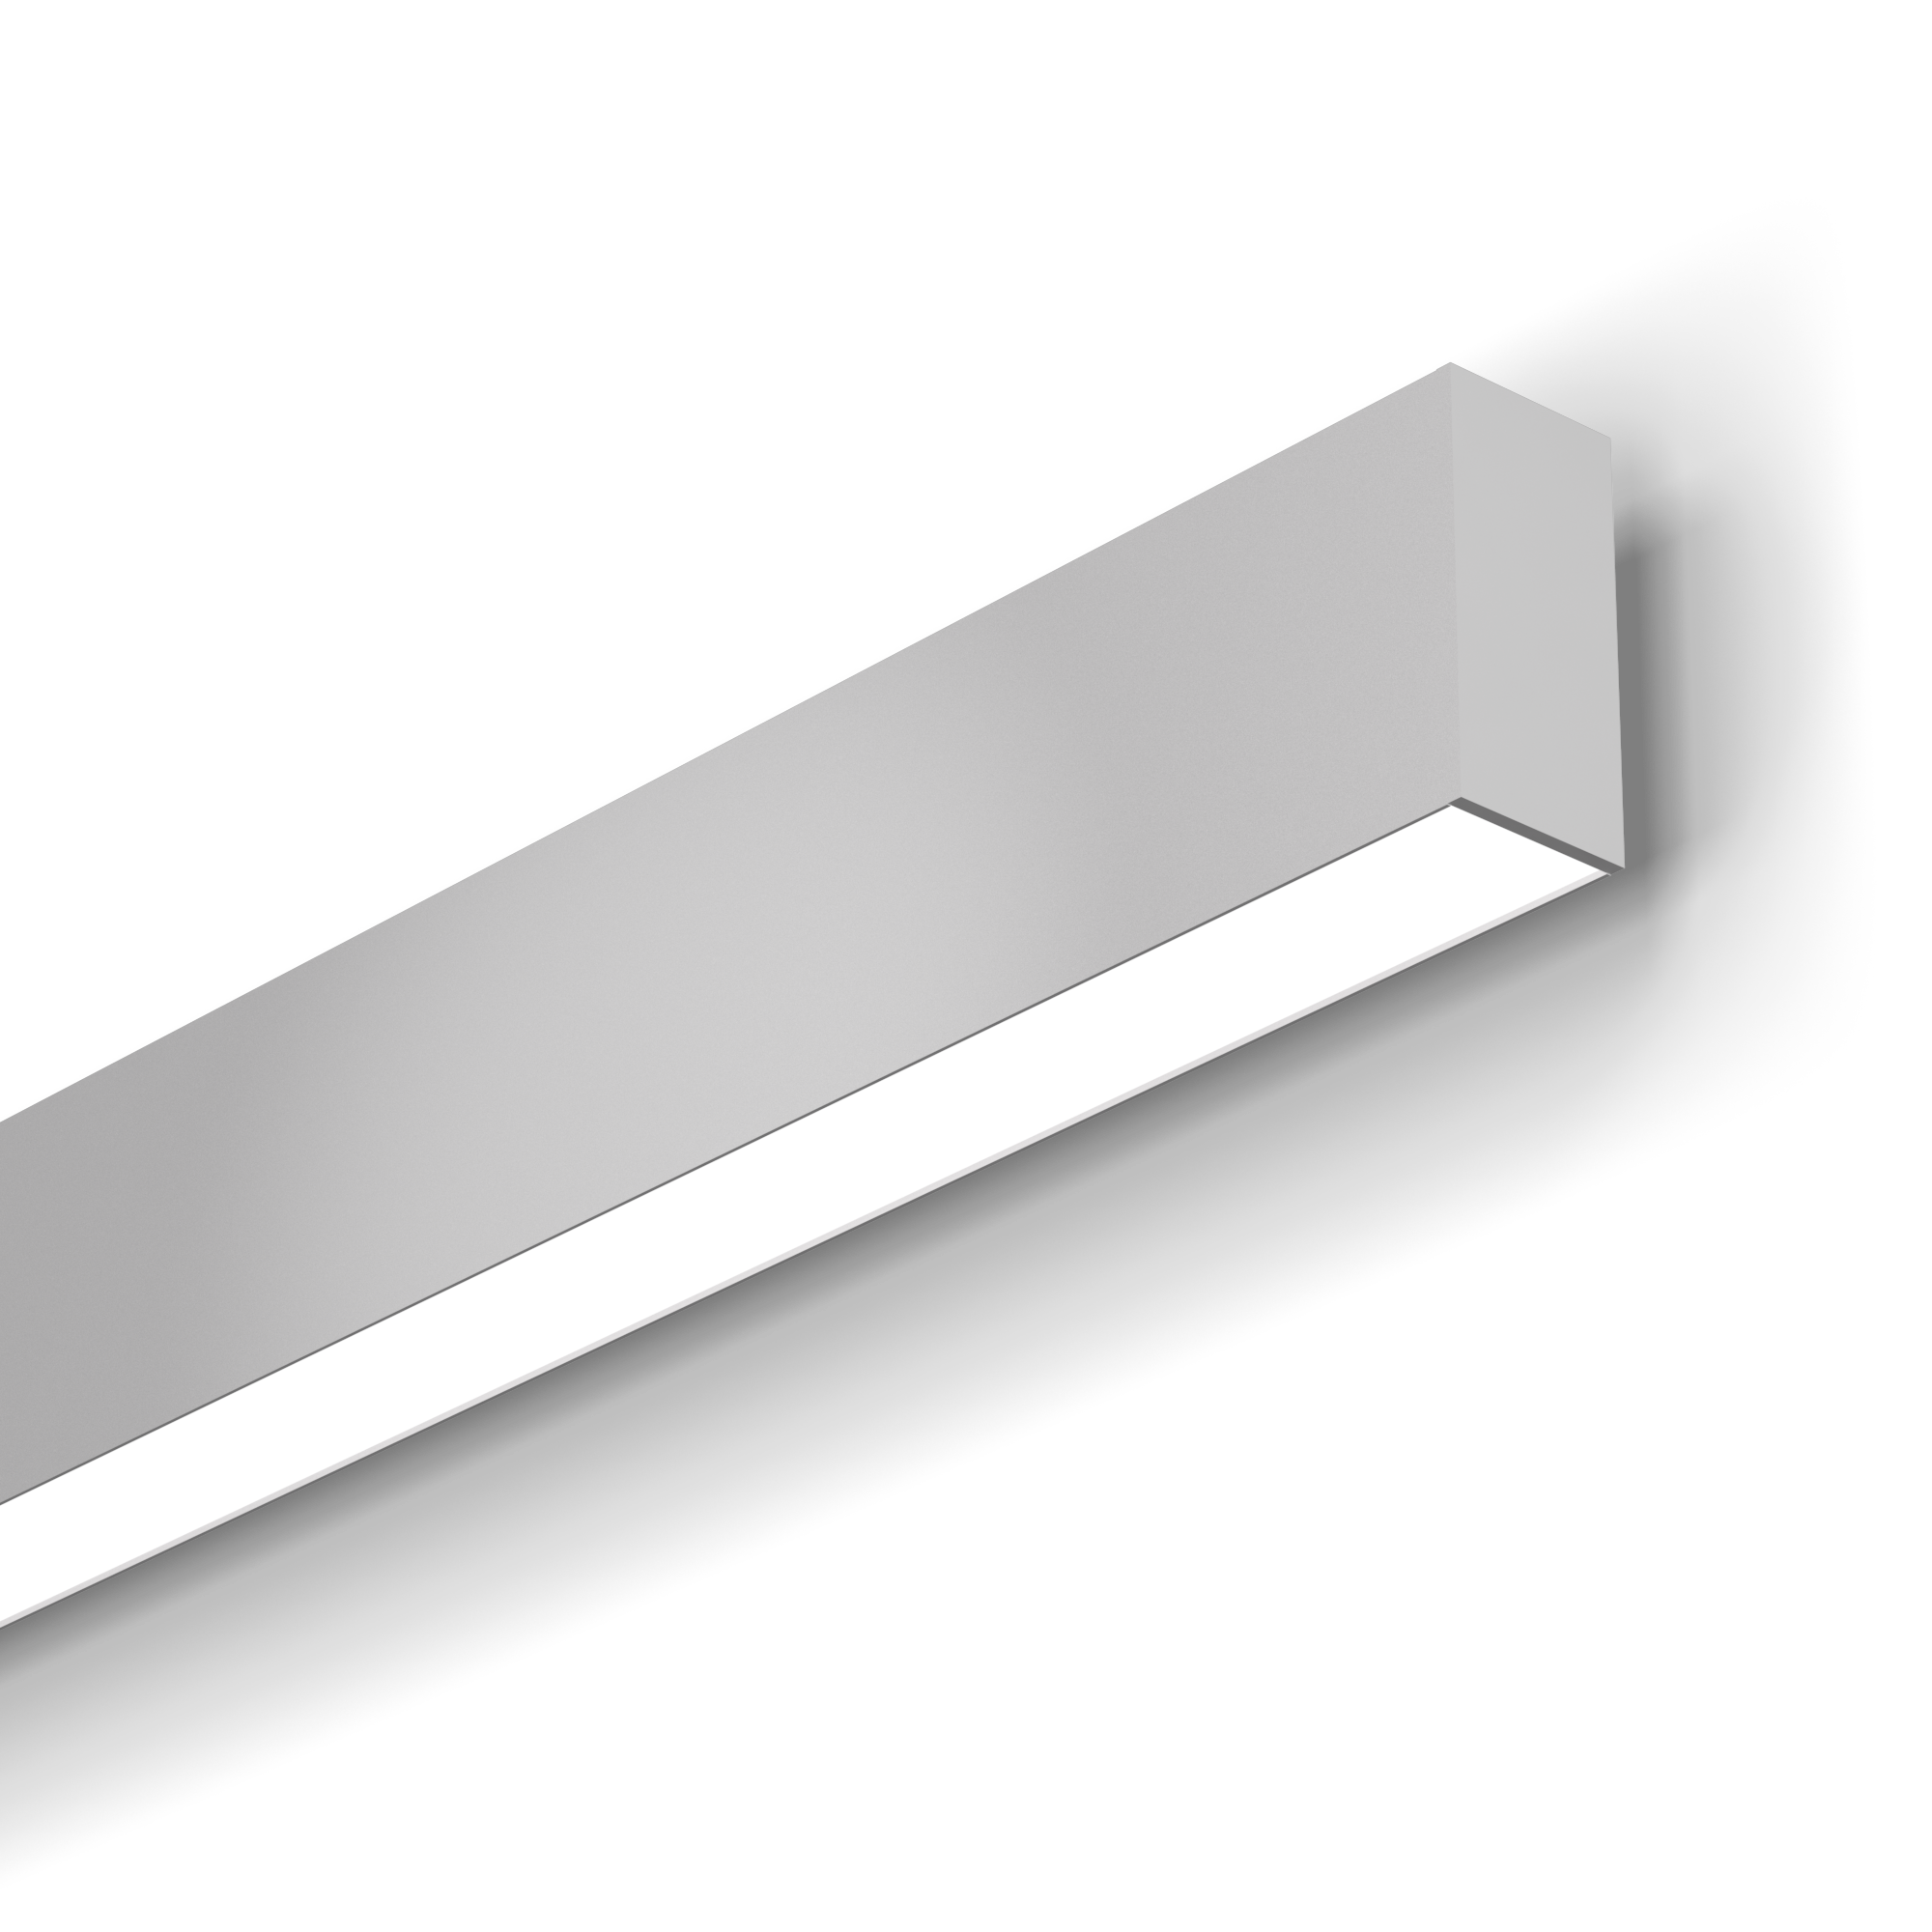 Wall mounted linear with integral on-board driver
MICROBeam Wall is a 1.4” x 2.95” sized linear for surface mounting, typically to a wall ceiling. MICROBeam Wall includes an integral, field serviceable, on-board driver. MICROBeam Wall brings SmartBeam® capabilities up to a powerful 2000 lumens per foot combined direct and indirect. It’s small size designed to compliment architectural space. MICROBeam Wall is fully field serviceable and can be supplied in continuous runs and a variety of visually appealing shapes.
Typical Applications

 	Offices and co-working spaces
 	Schools, colleges and universities
 	Retail spaces